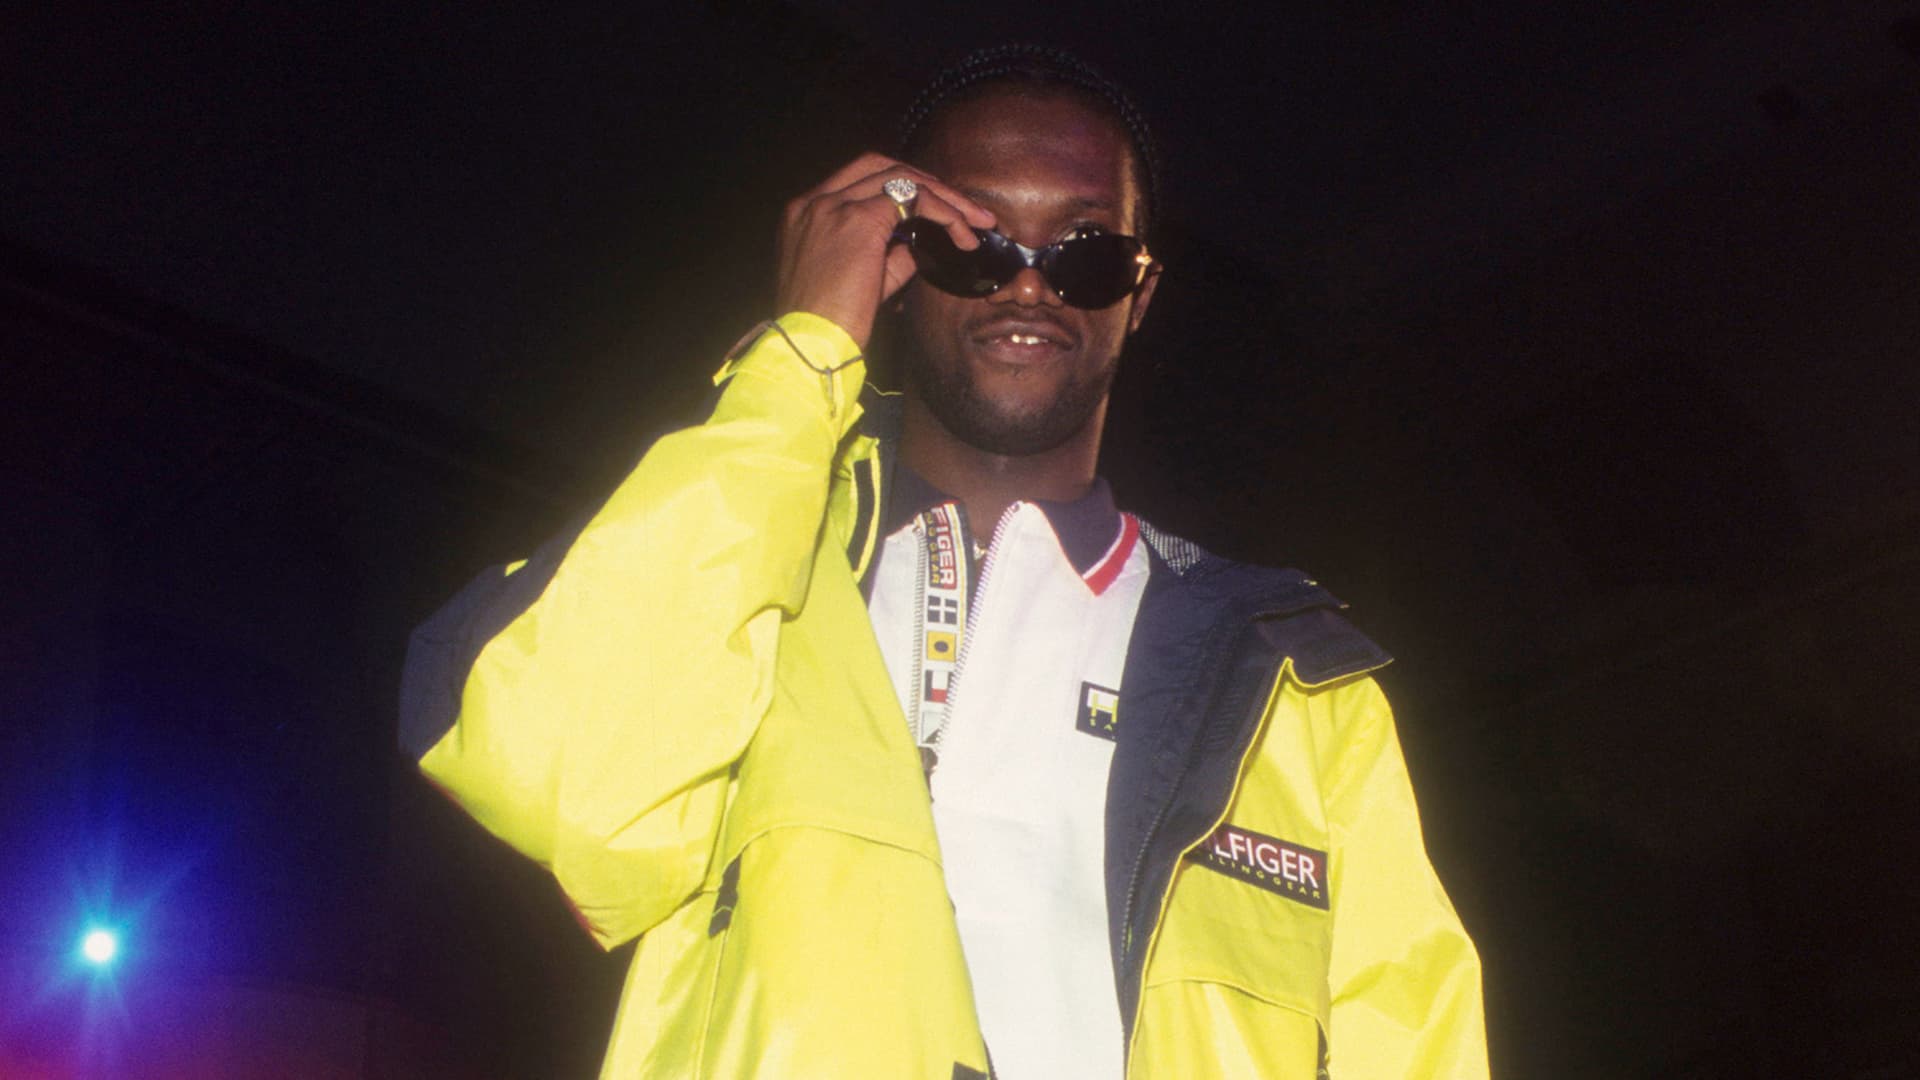 Pras Michel of the Hip hop group the Fugees performs on August 1, 1996 in New York City, New York.